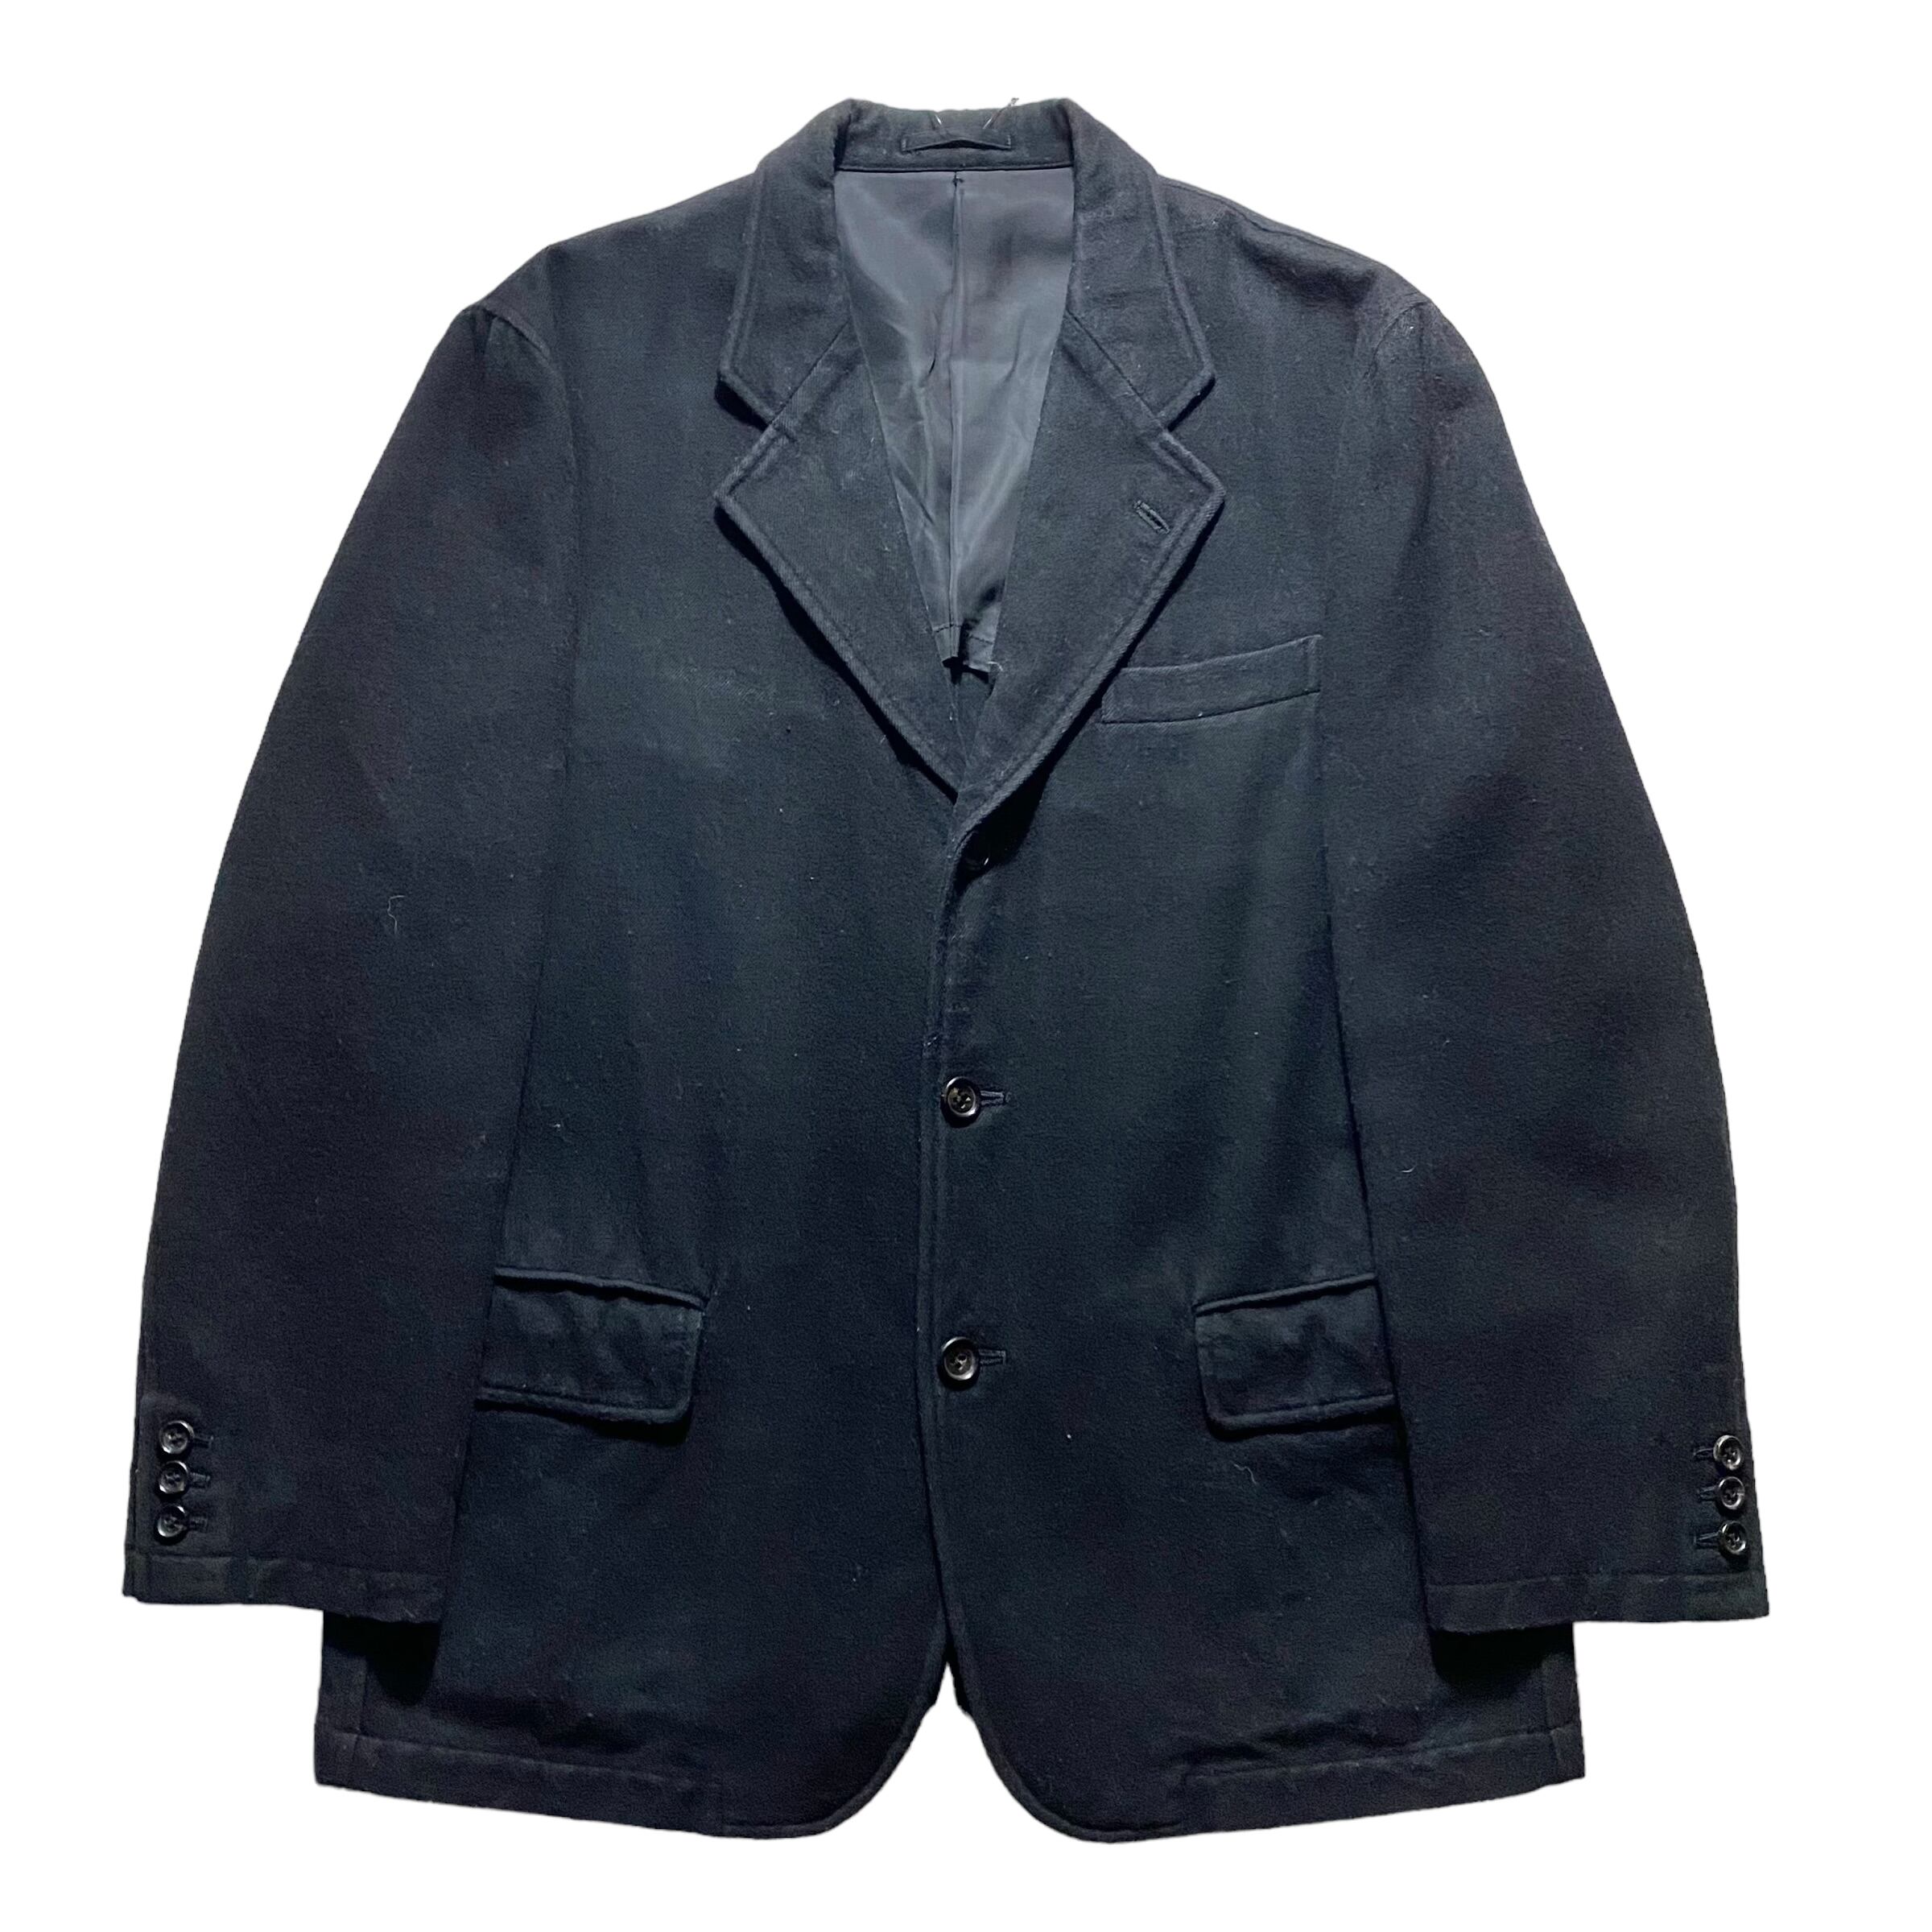 AD1995 COMME des GARCONS HOMME herringbone pattern wool tailored